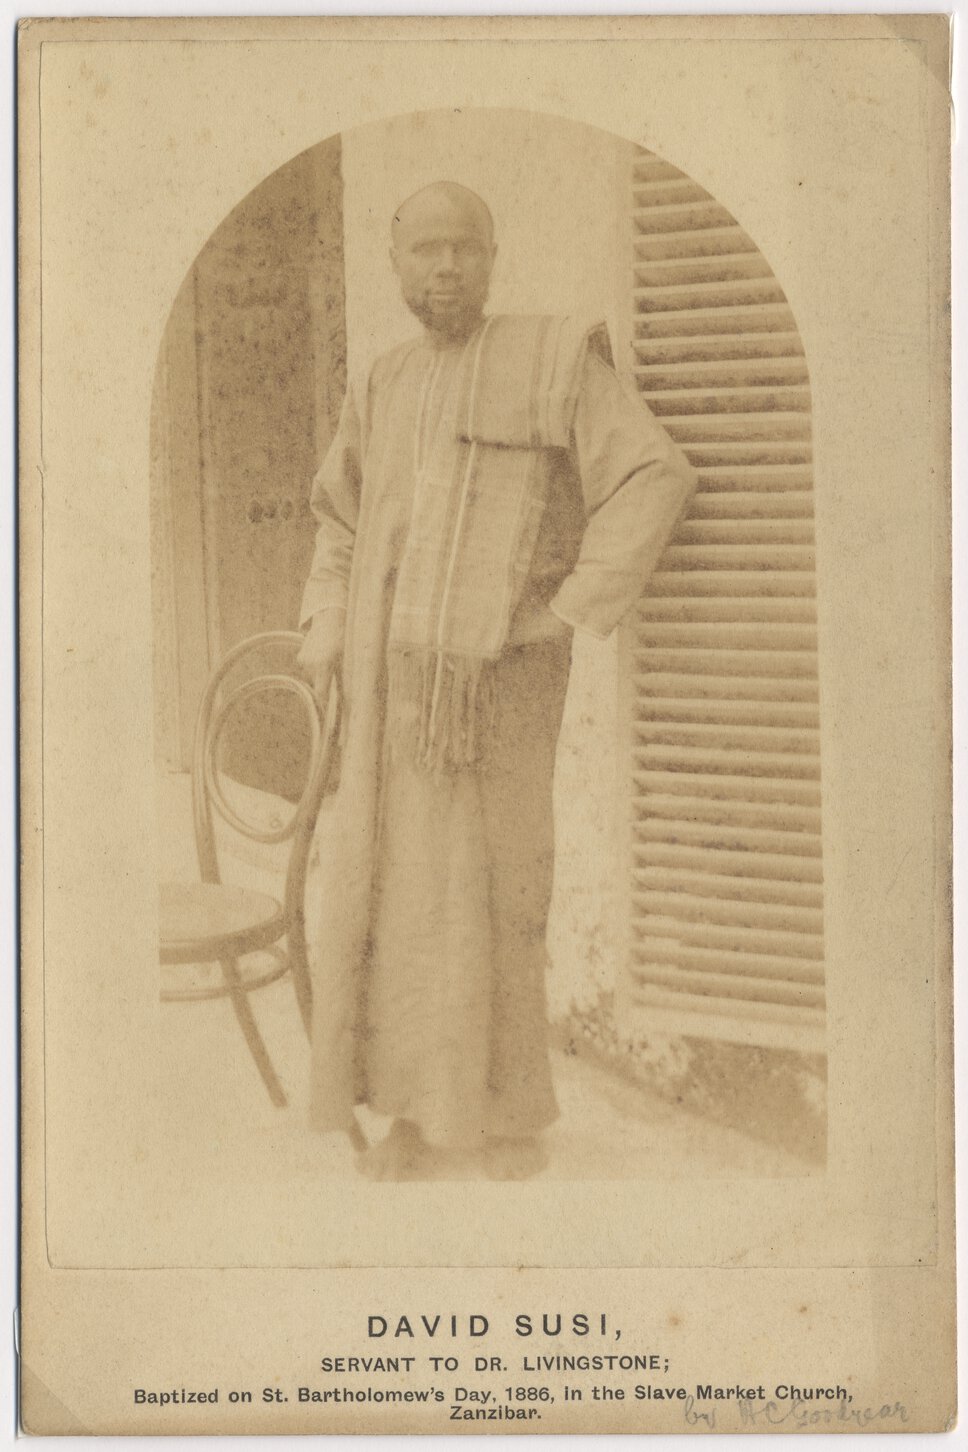 Abdullah Susi in traditional East African clothing, standing with body turned right and facing forward.